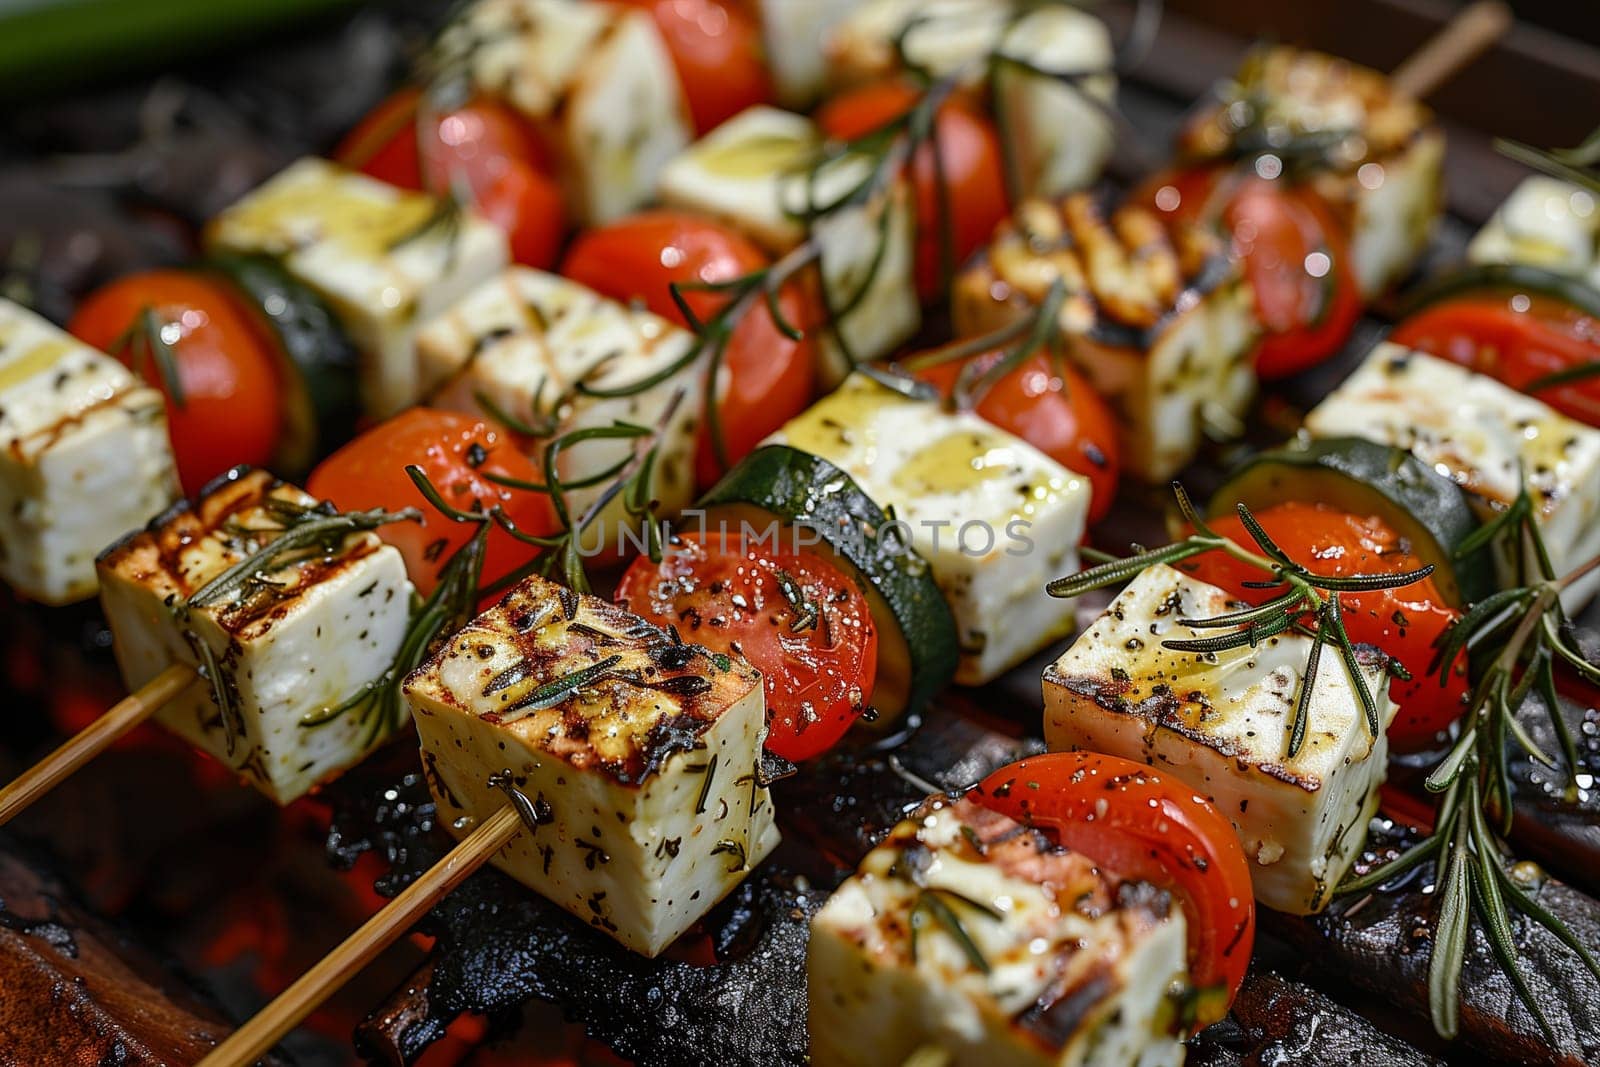 Grilled vegetarian grill skewers, tomato, sheep cheese and zucchini slices, rosemary garlic oil. by Sd28DimoN_1976